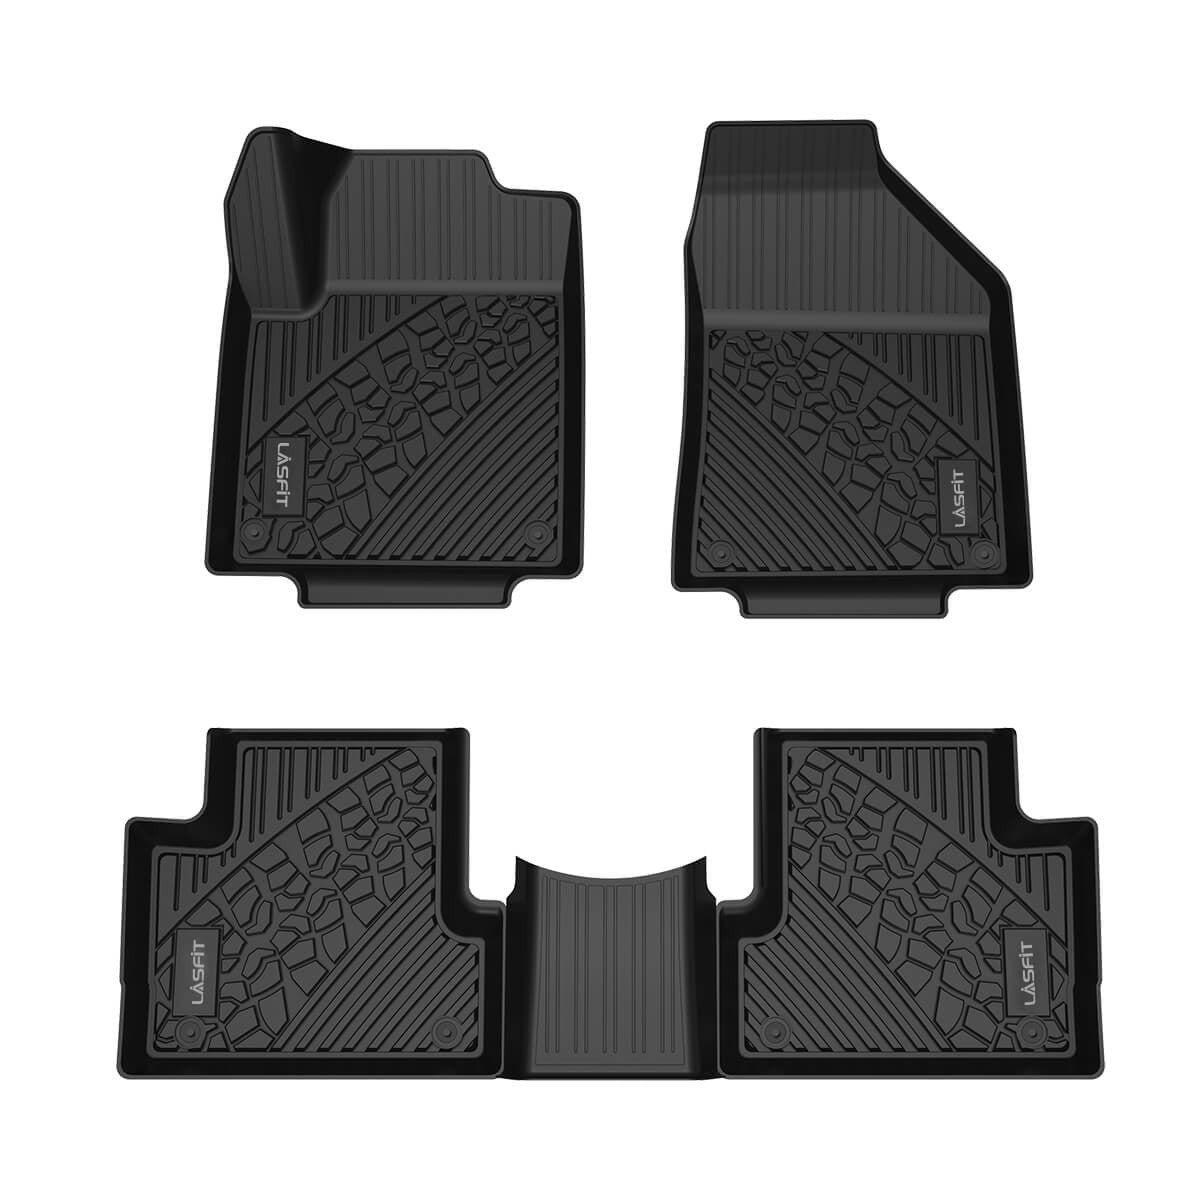 LASFIT Floor Mats for 2013-2015 Jeep Grand Cherokee, All Weather Fit TPE Floor Liners Set, 1st All Weather Mats For Jeep Grand Cherokee L